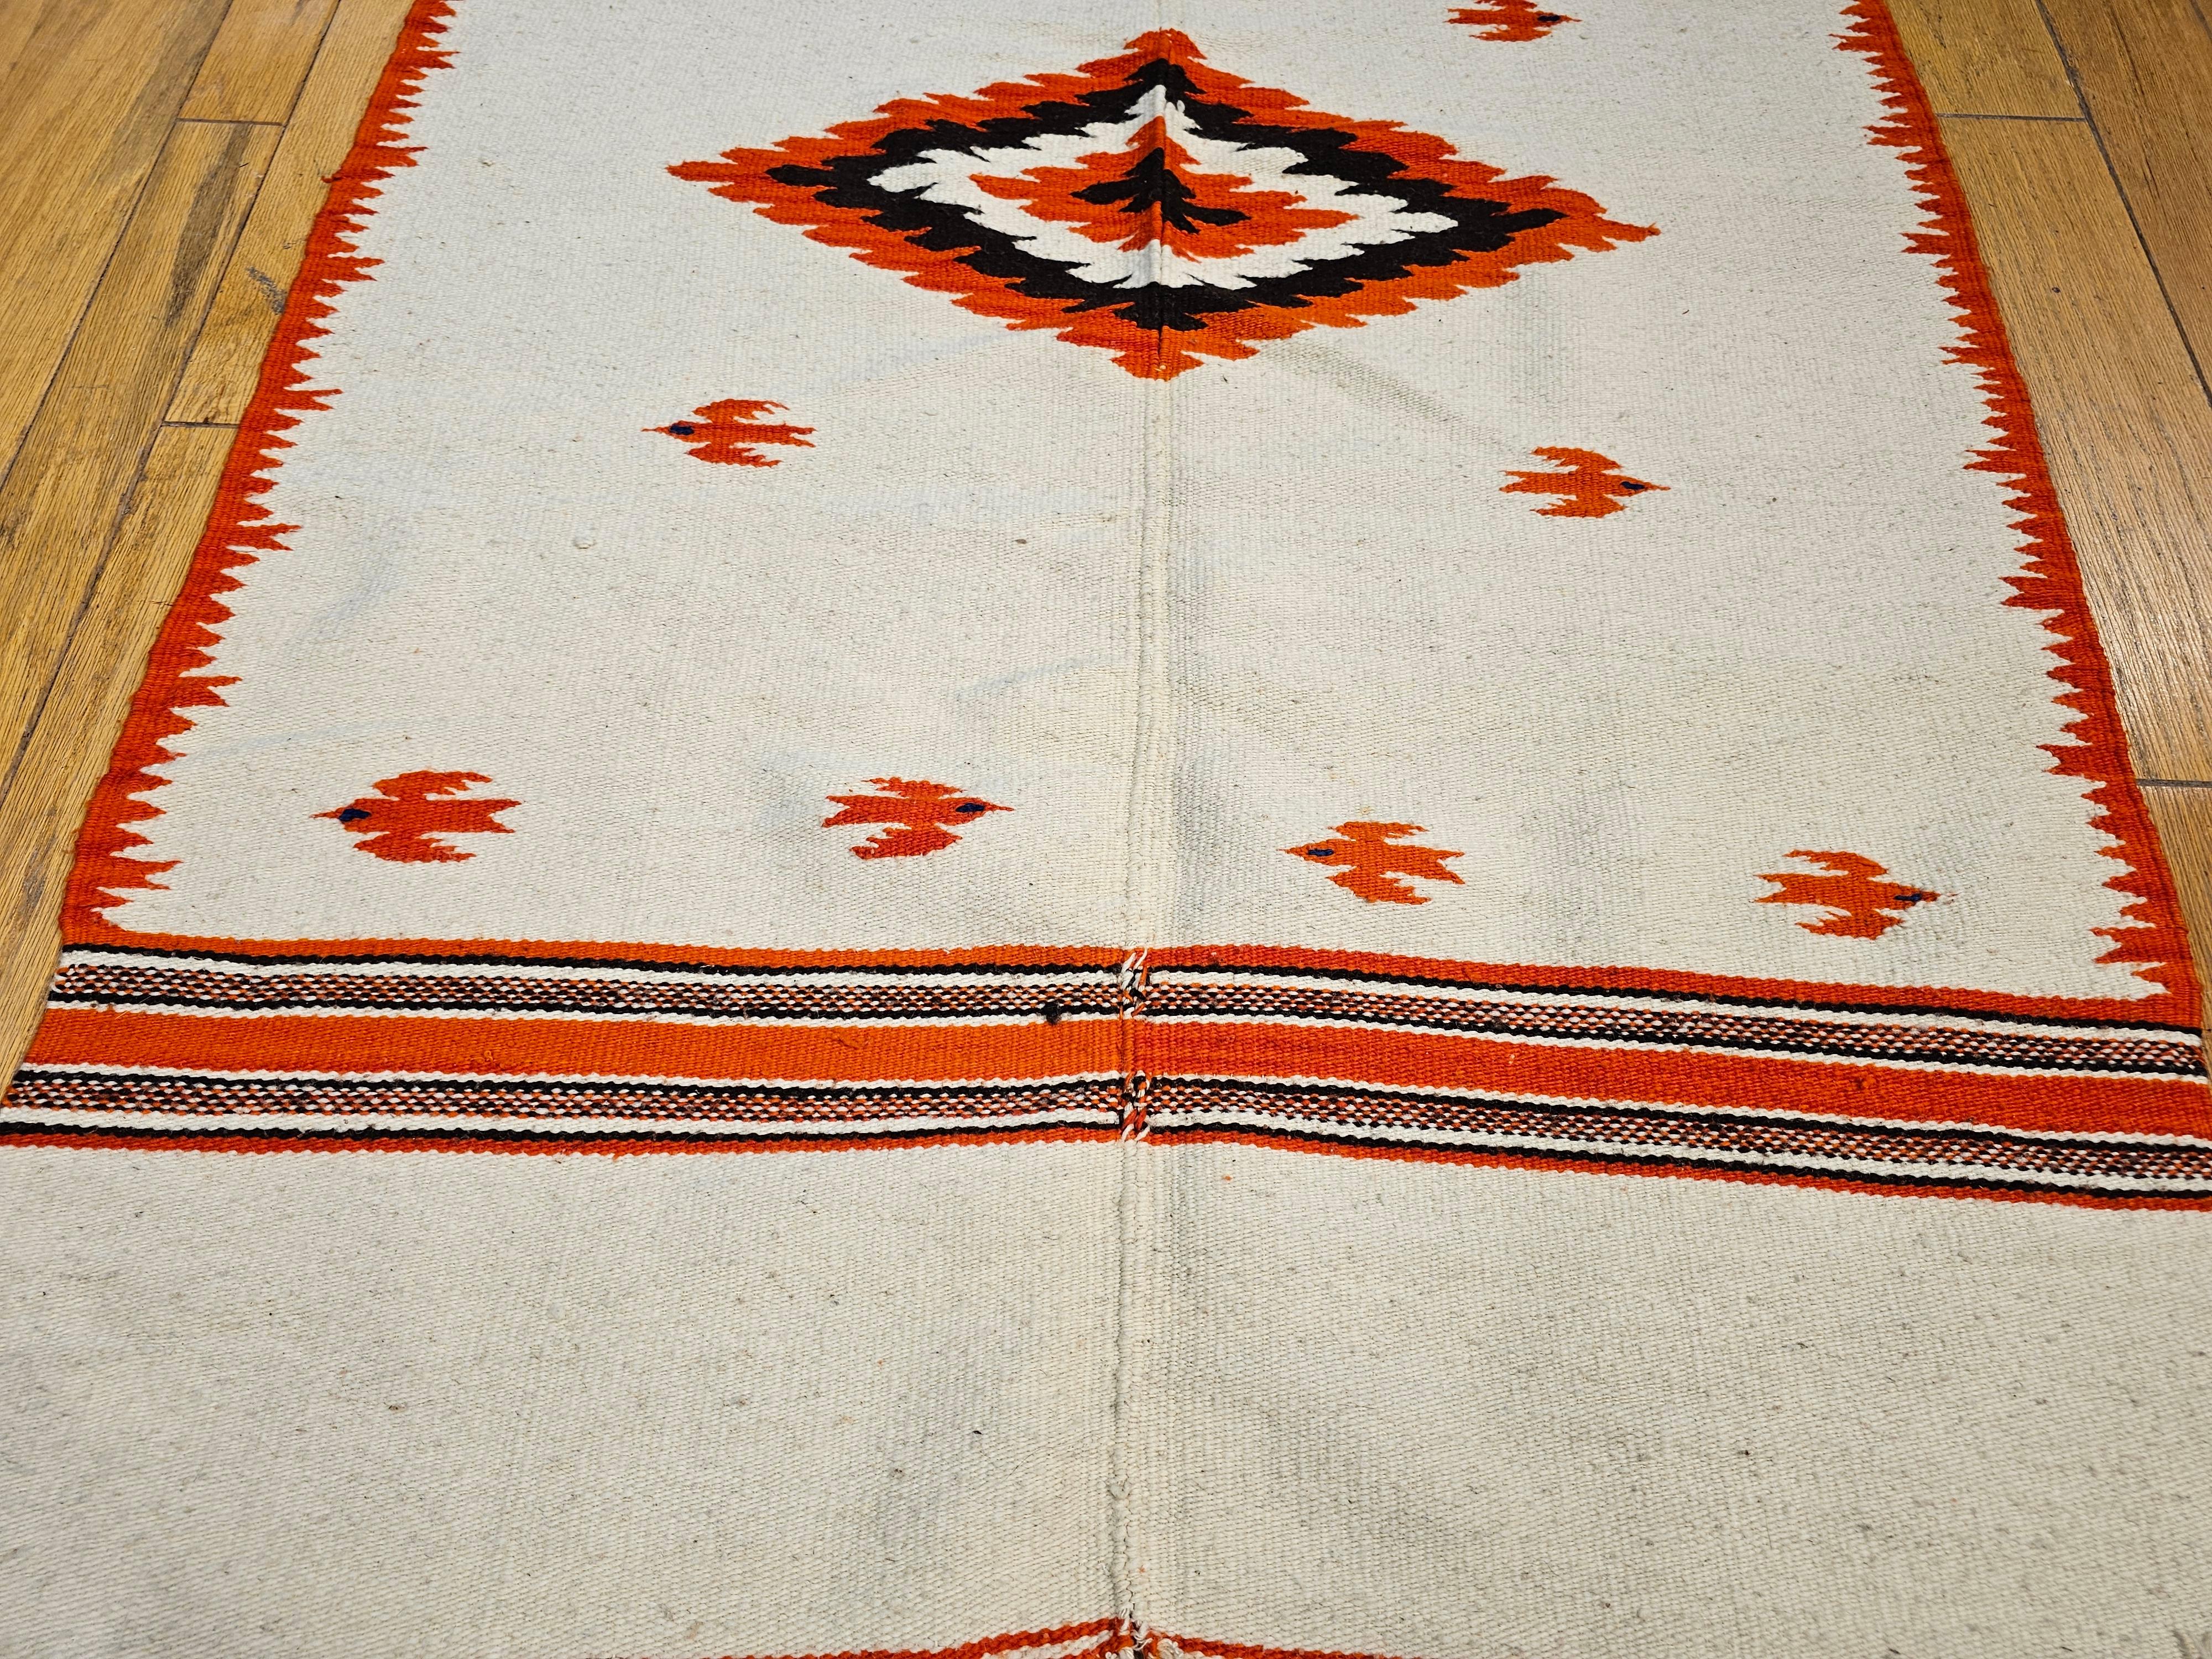 20th Century Vintage Mexican Serape Saltillo Kilim Rug with Mythical Bird Designs For Sale